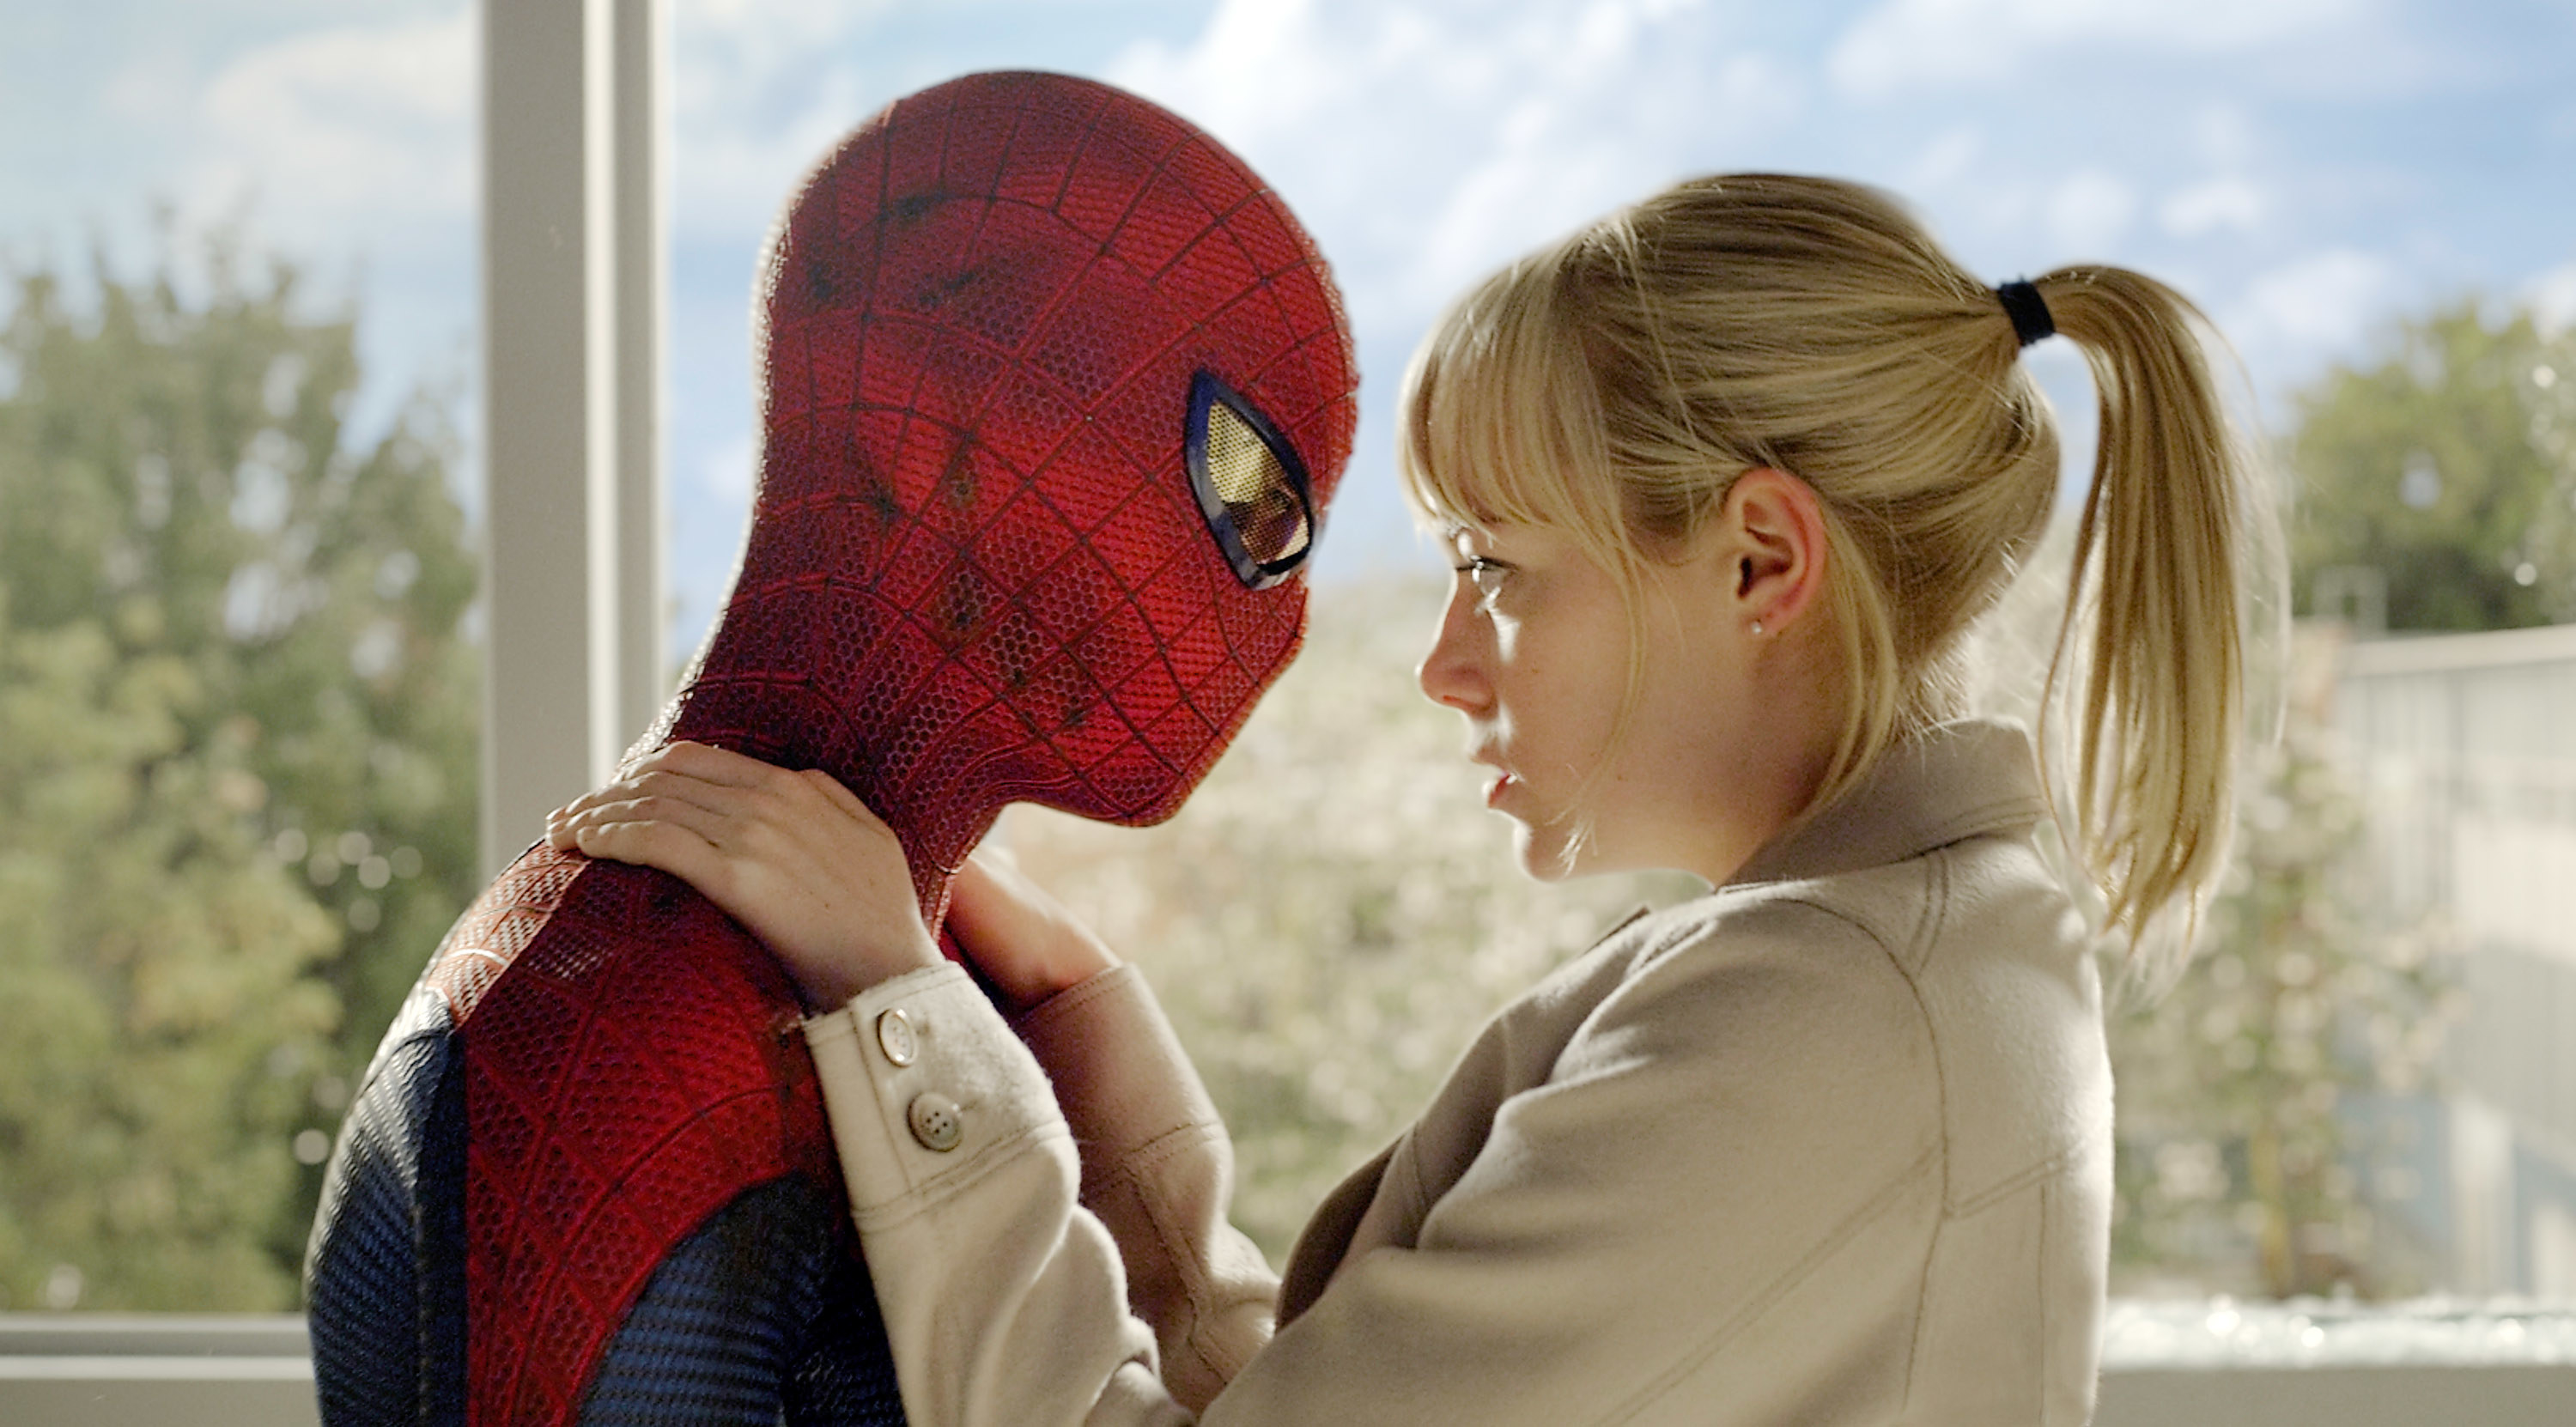 Andrew as Spider-Man embracing Gwen Stacey